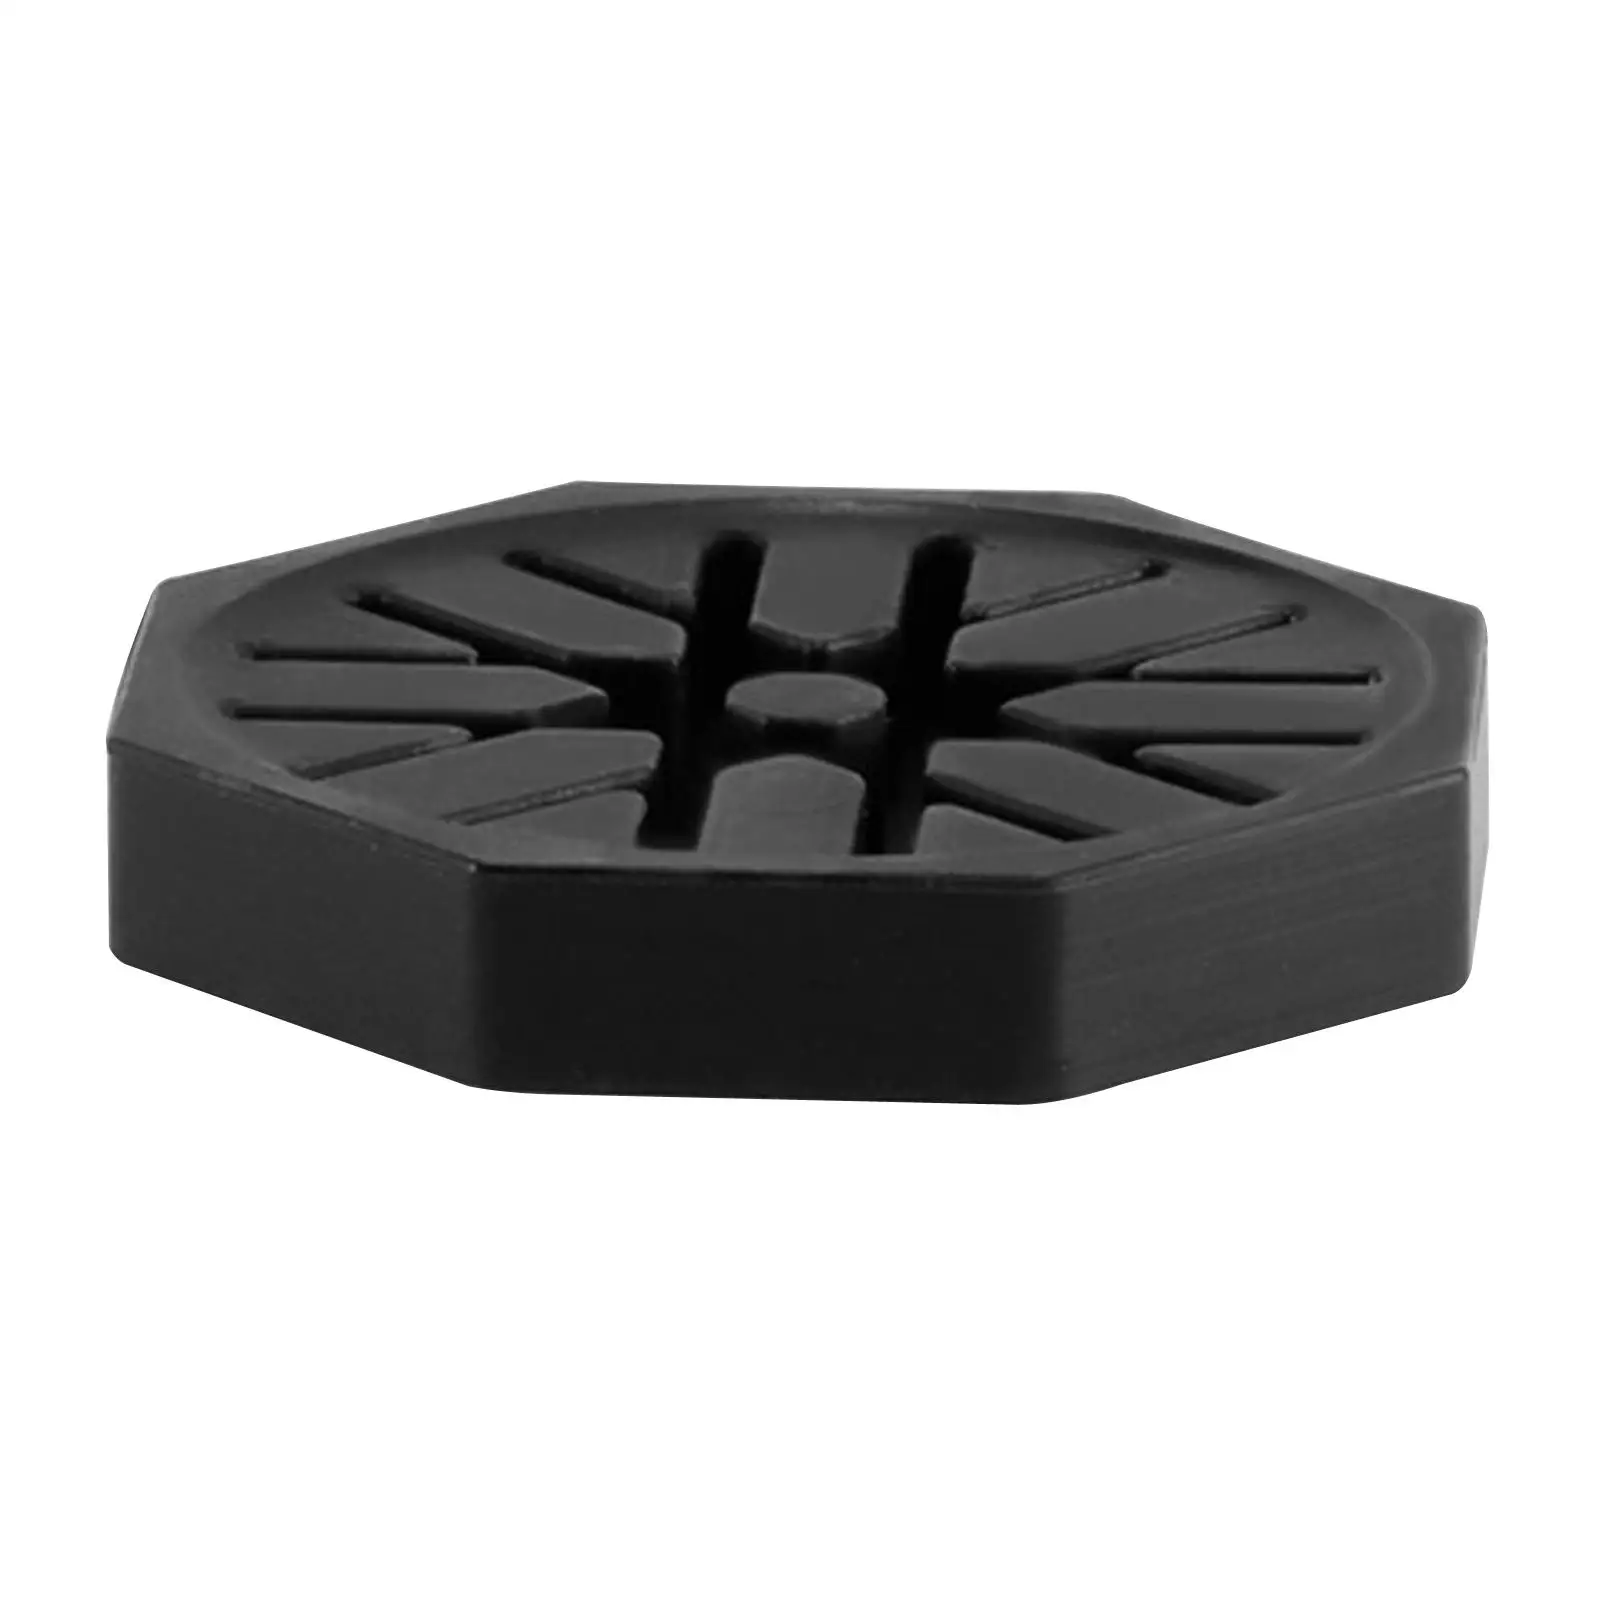 Silicone Puck Screen Holder Coffee Portafilter Cleaner Espresso Puck stand Reusable Basket Coffee Filters